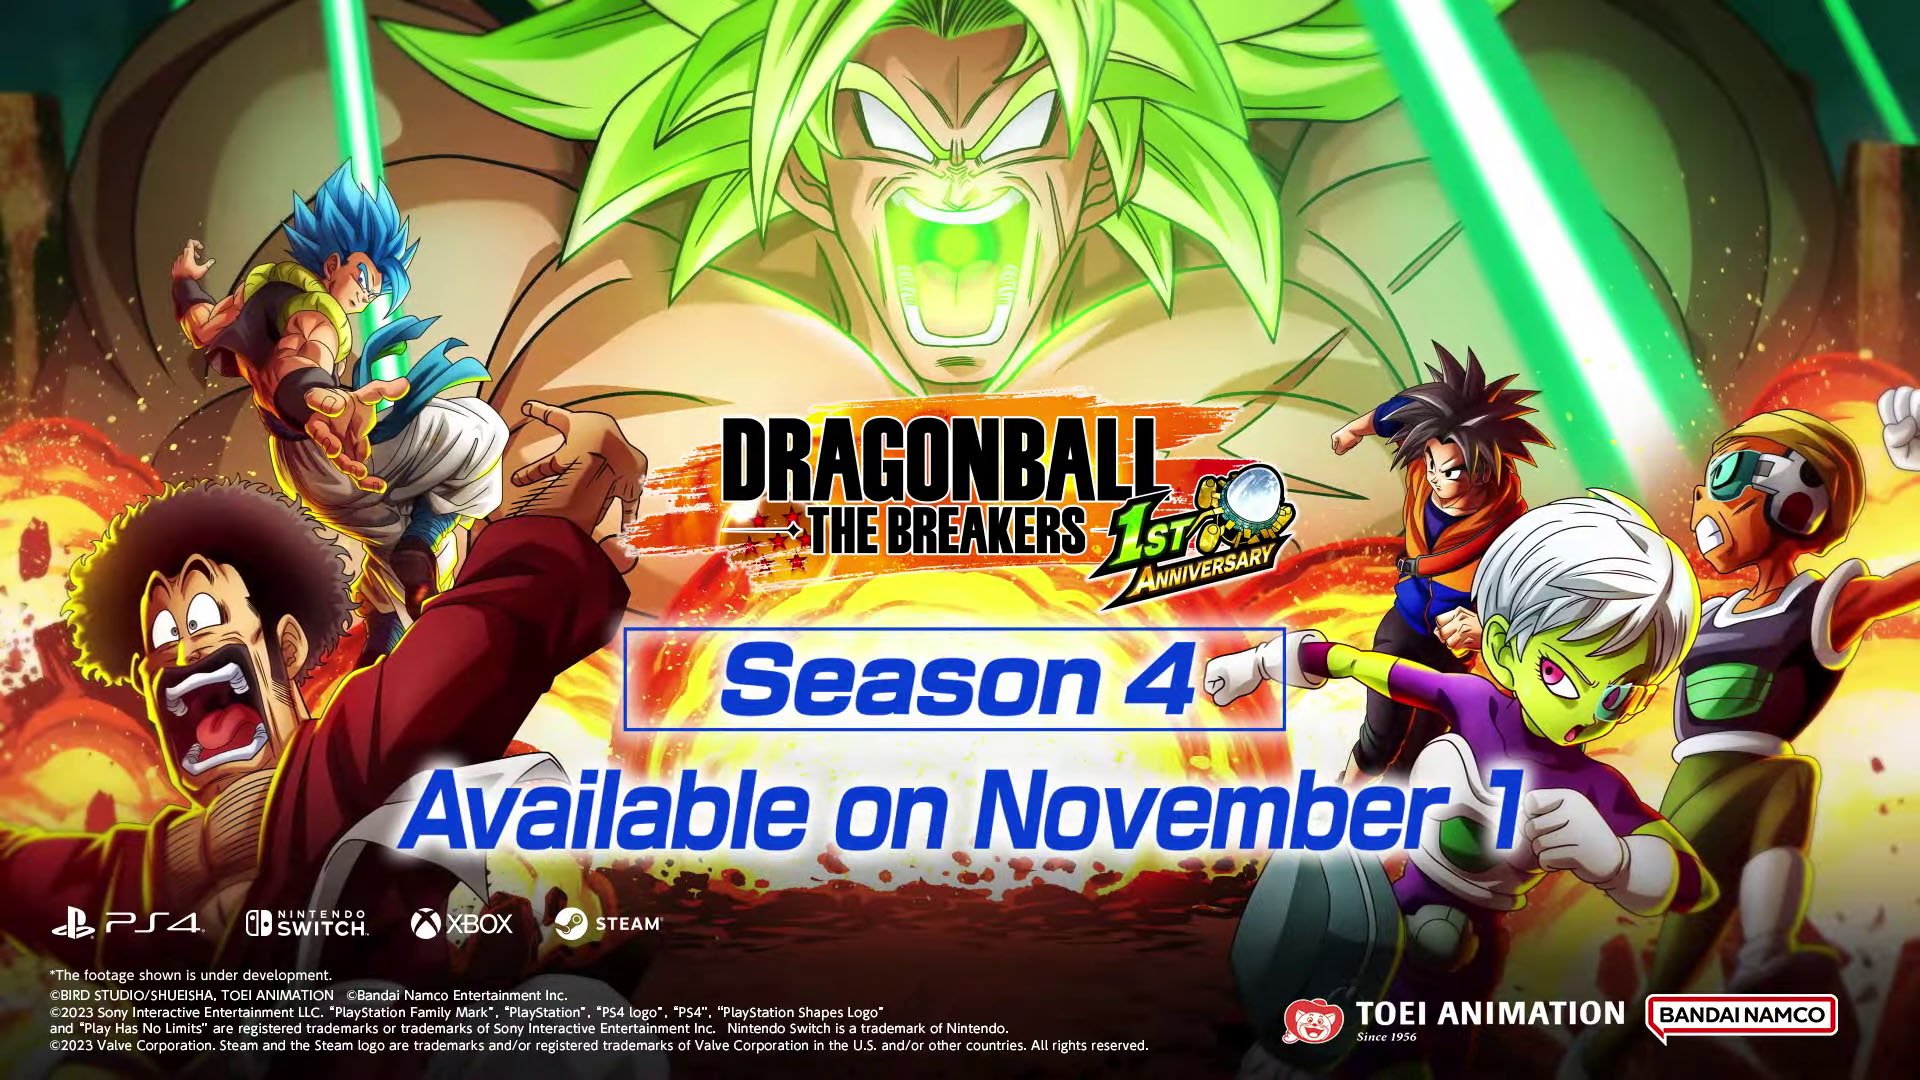 Dragon Ball The Breakers Beta Release Date and Time